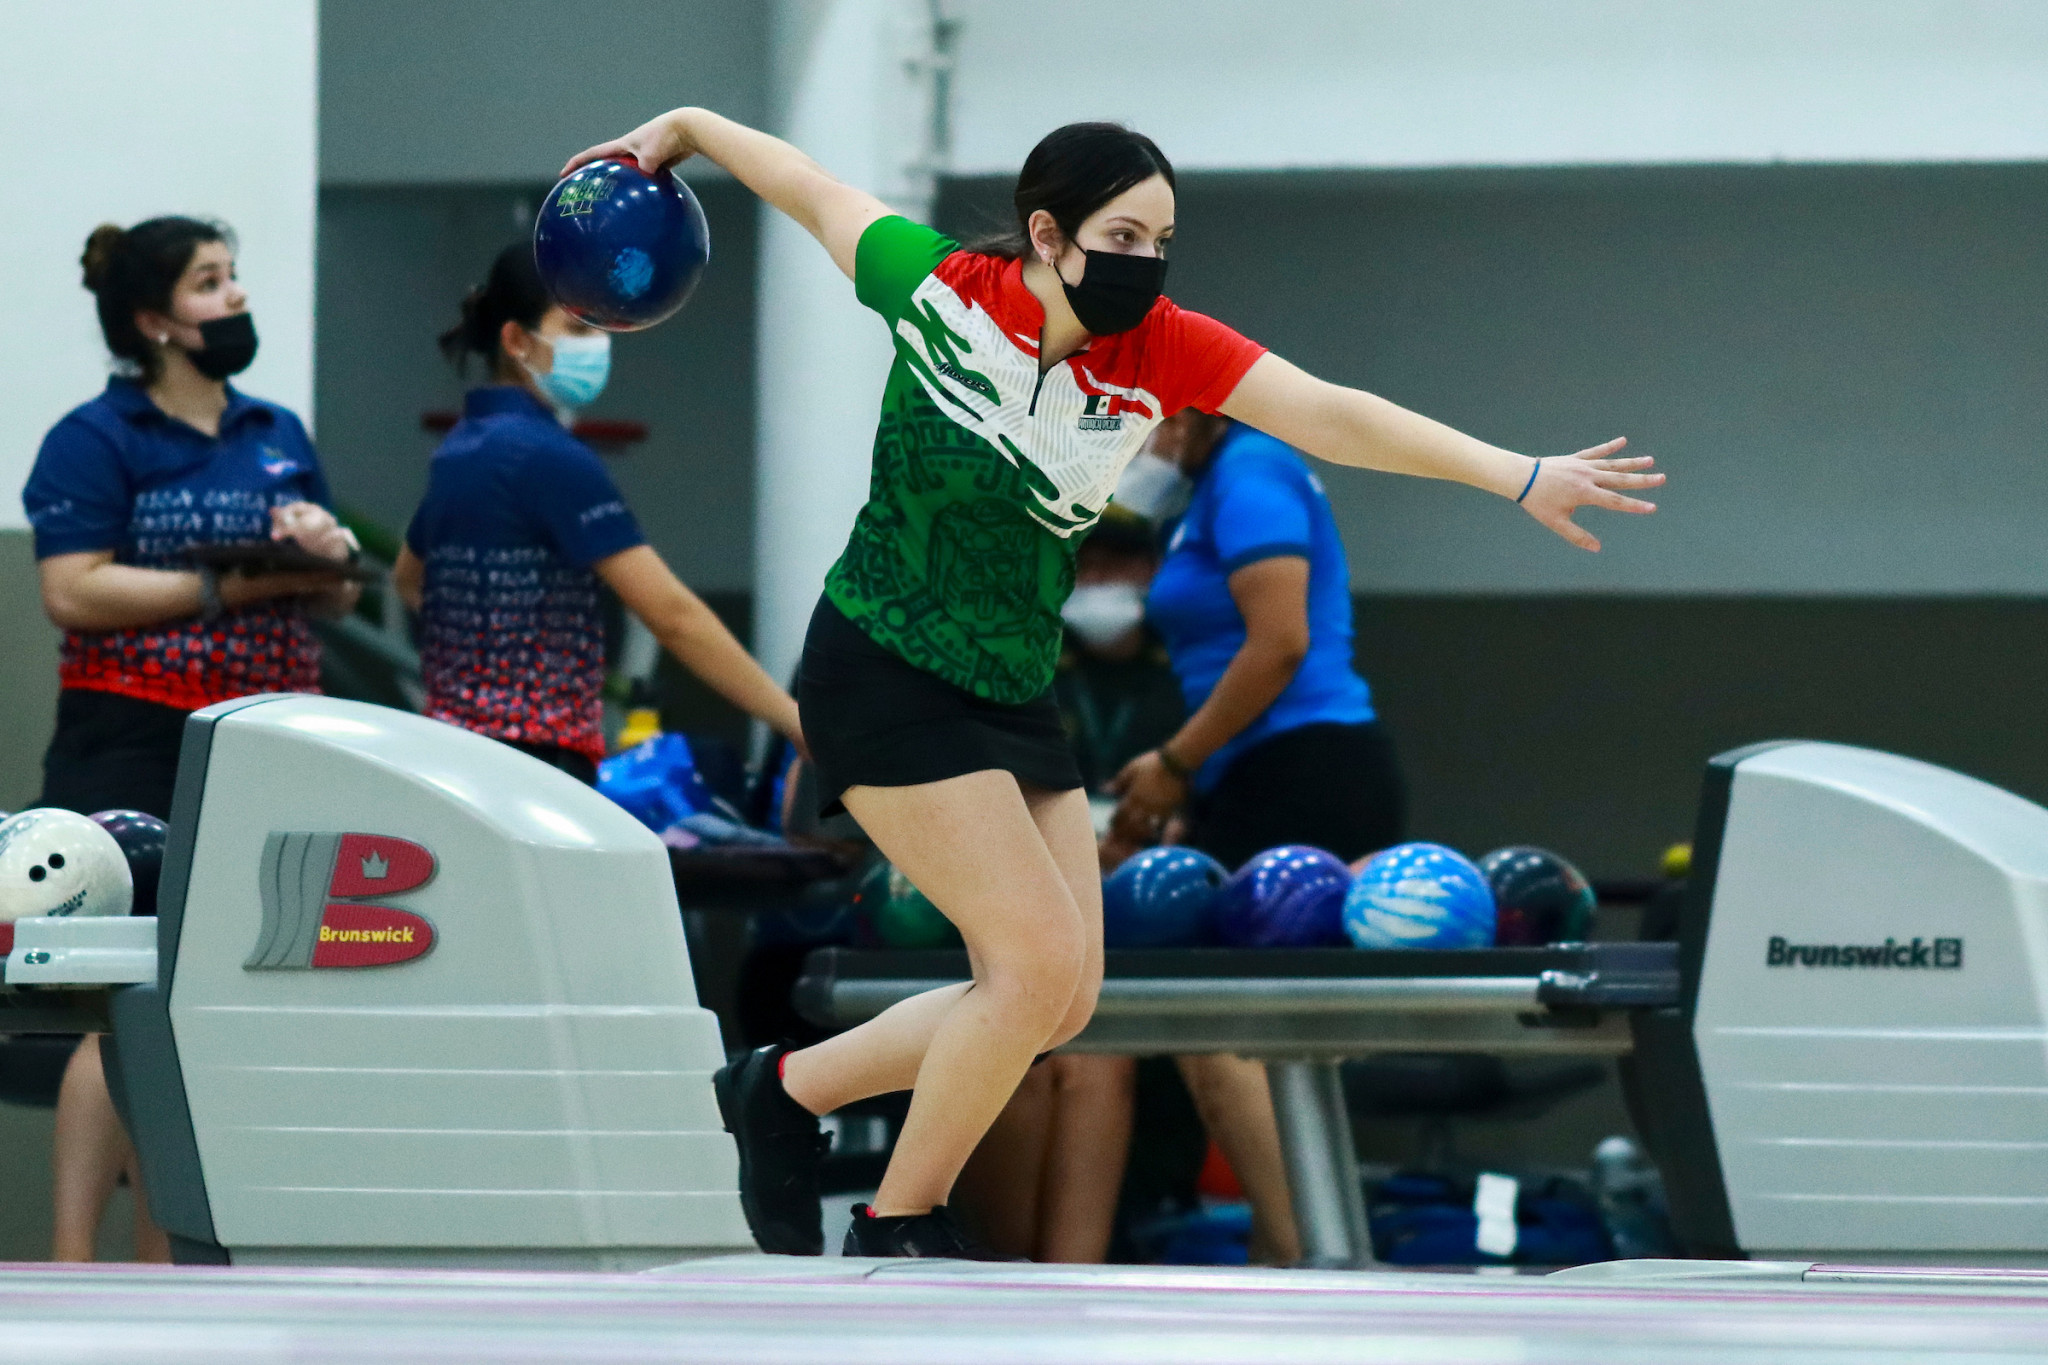  Bowling got underway at Cali 2021 with the men's and women's doubles competitions ©Agencia.Xpress Media